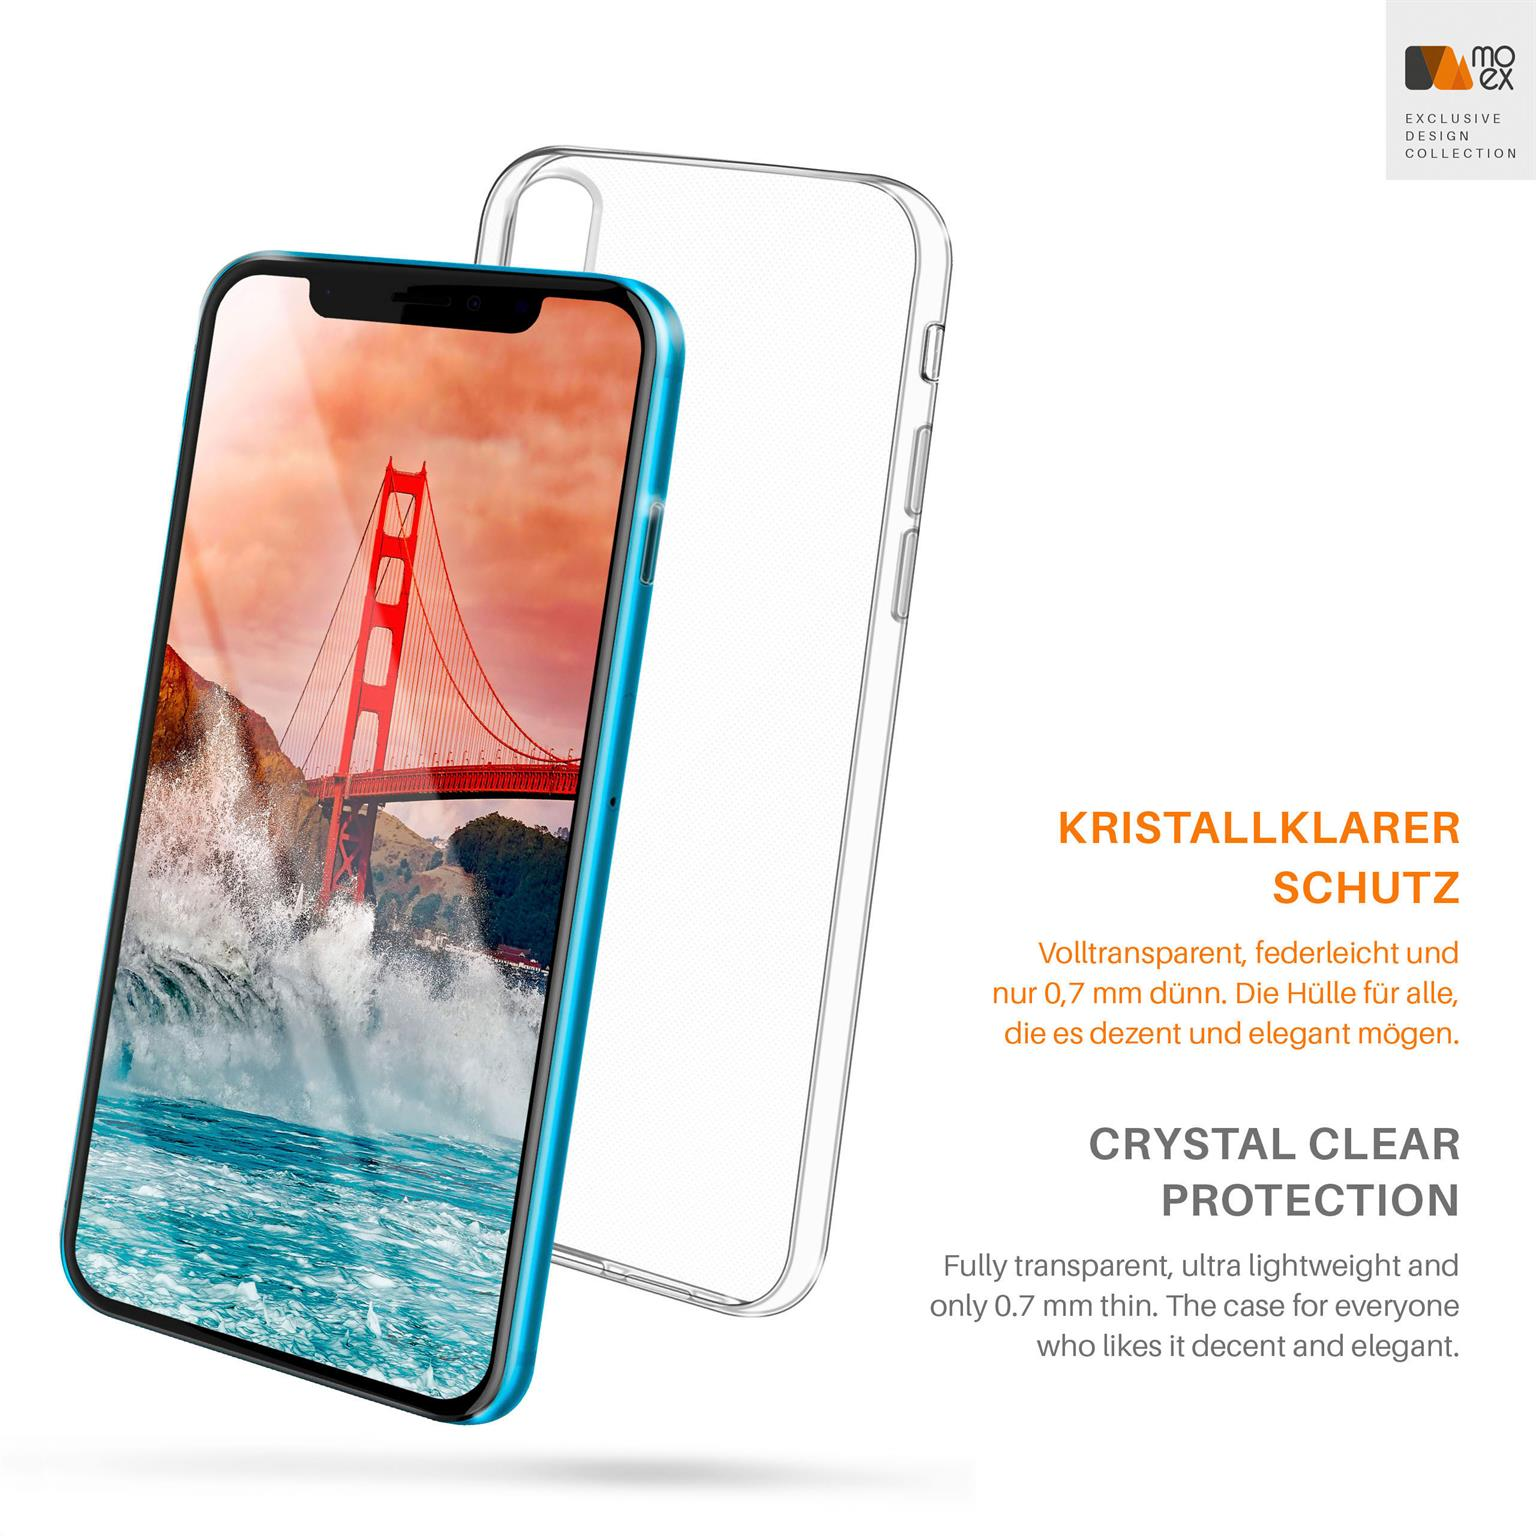 Case, Apple, MOEX XR, Backcover, iPhone Aero Crystal-Clear